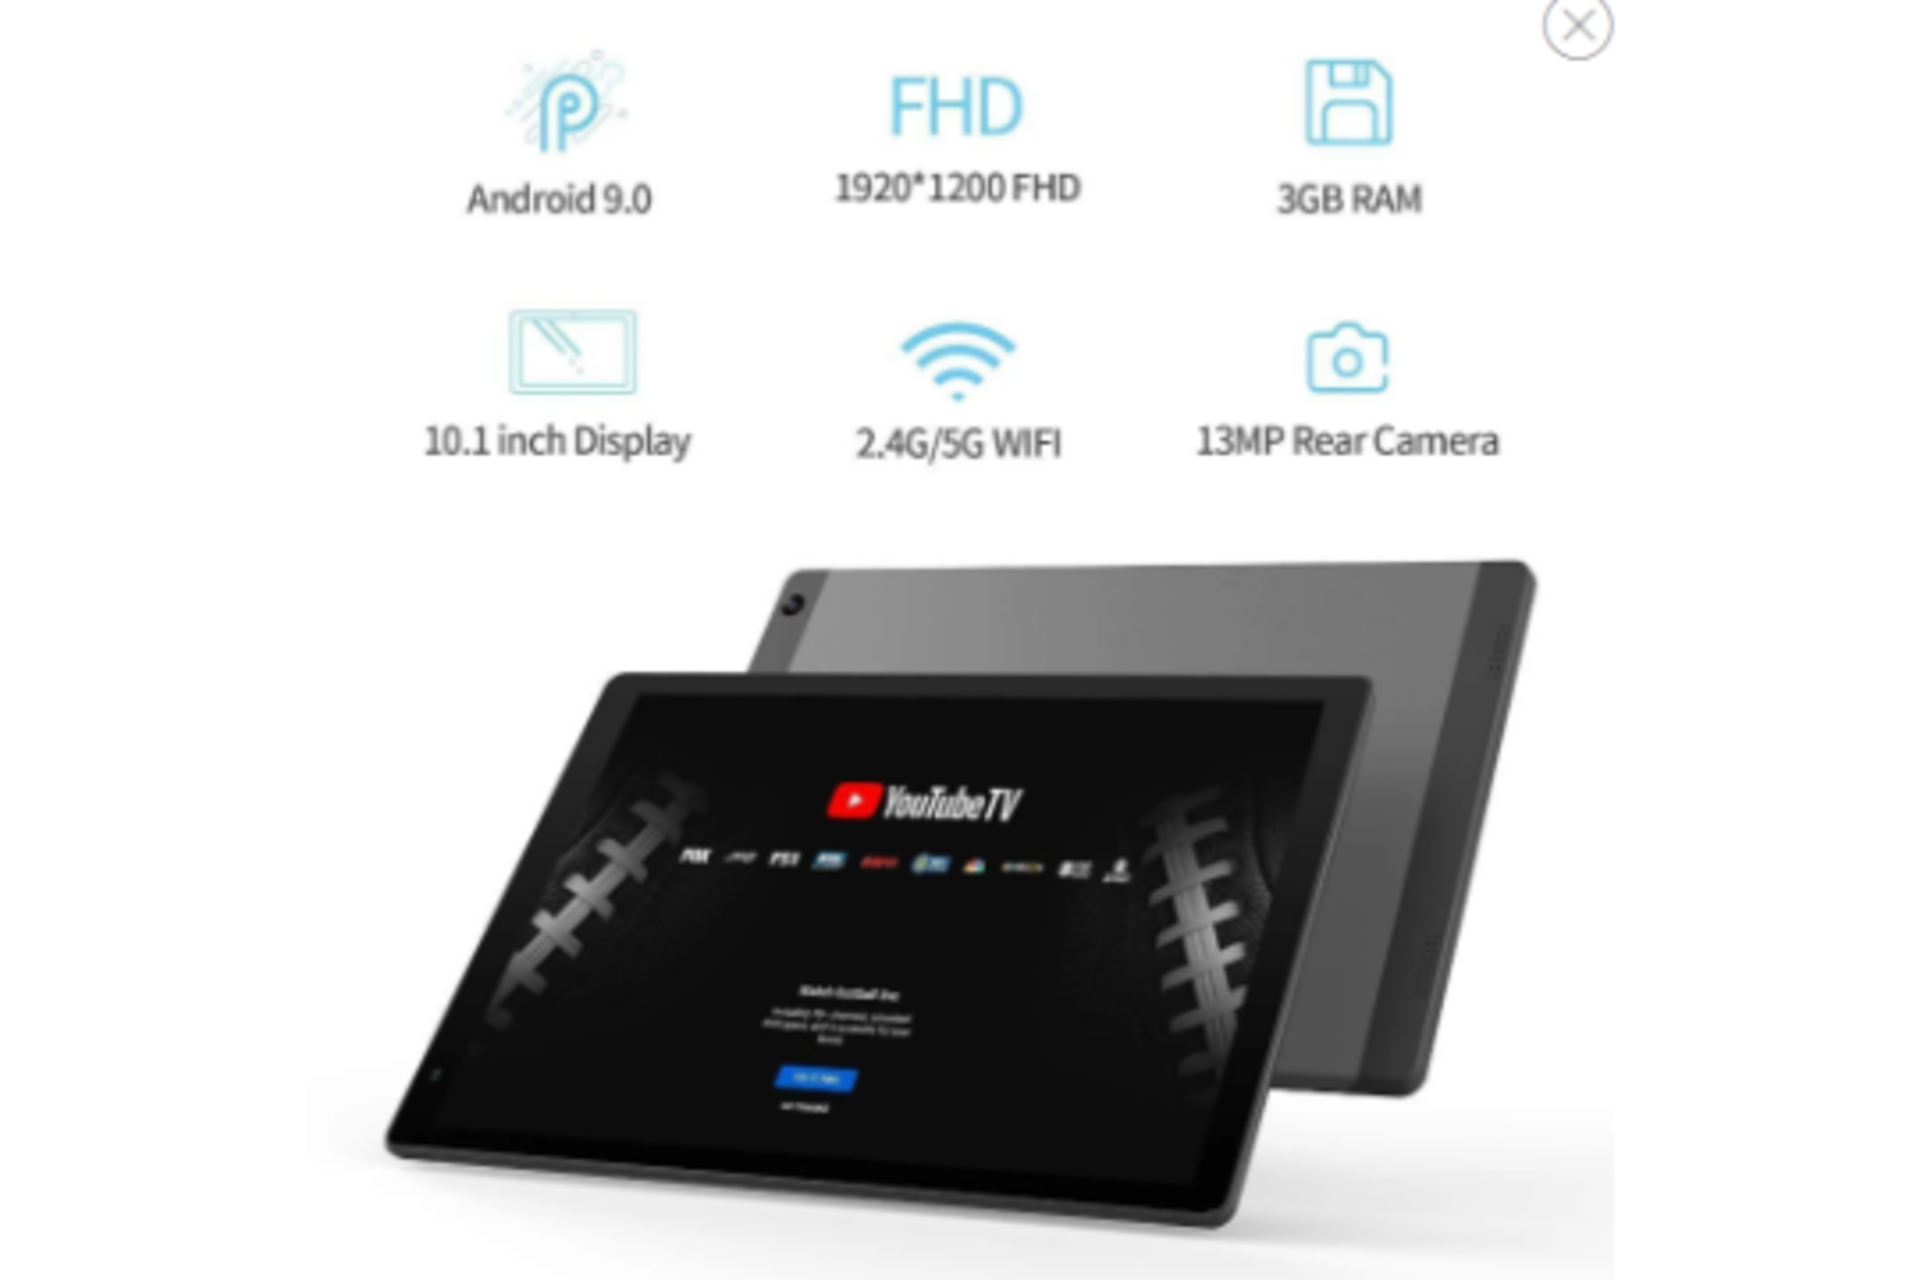 New Boxed VANKYO MatrixPad Z10 Tablet, Android 9.0 Pie, 3 GB RAM, 10.1" 1080p Full HD Display. - Image 3 of 3